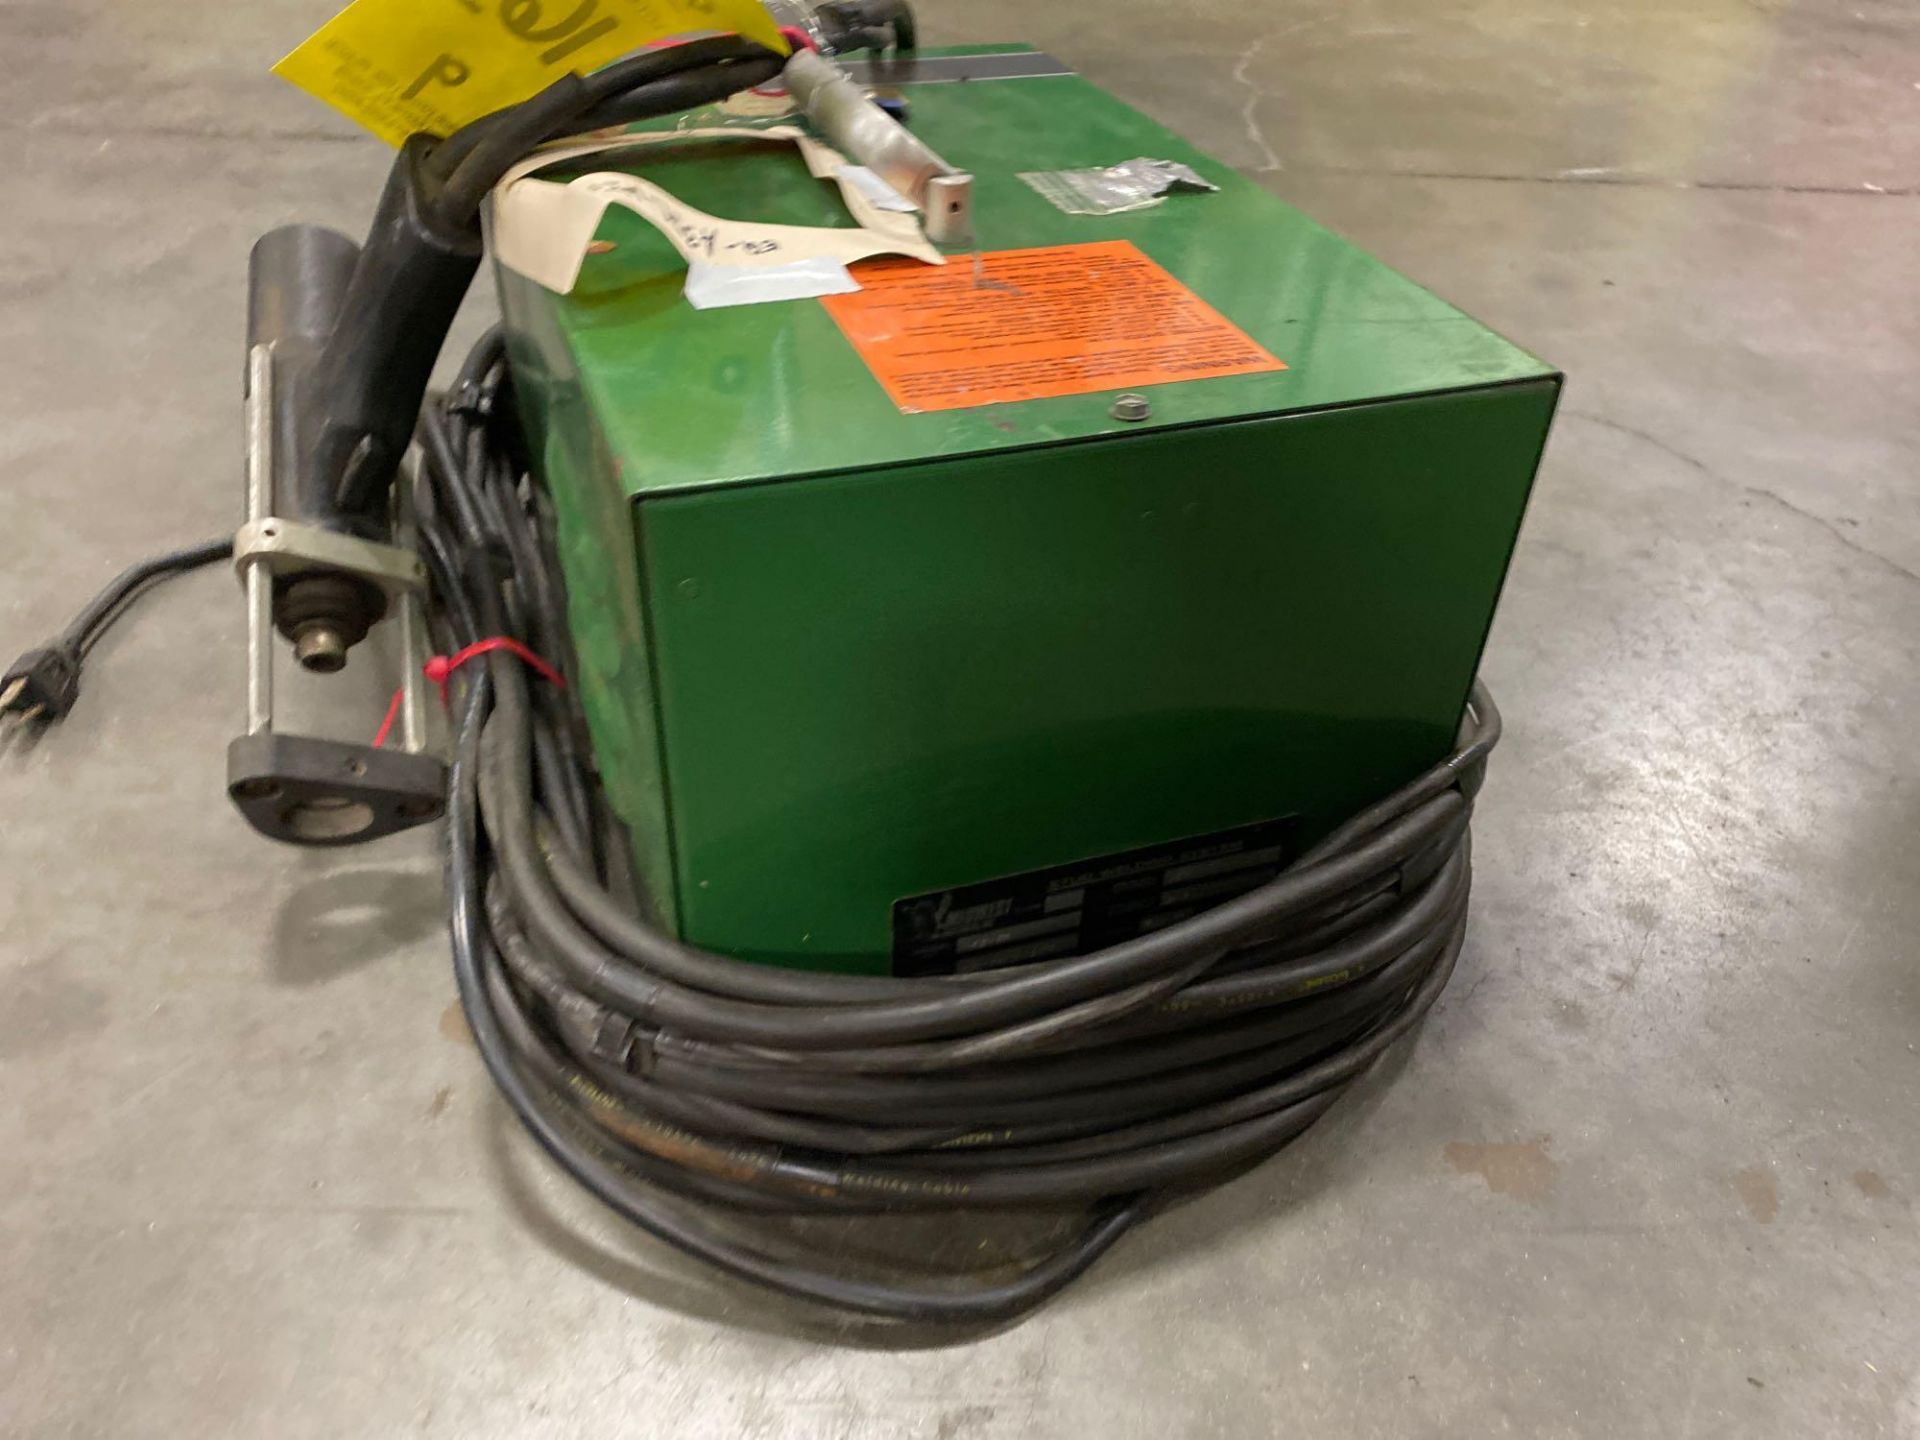 MIDWEST CD 50 WELDER - Image 3 of 4